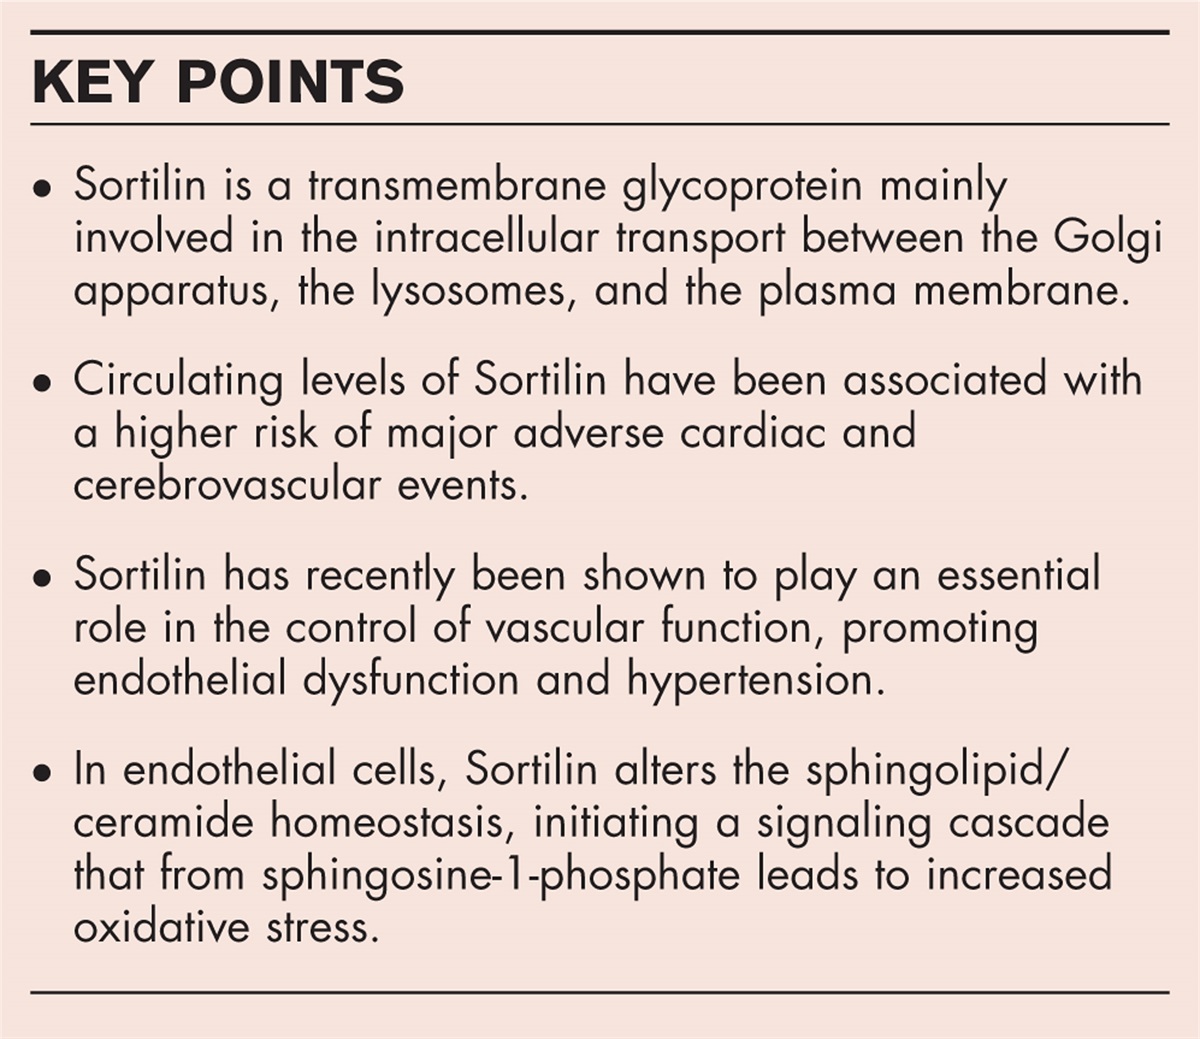 Sortilin and hypertension